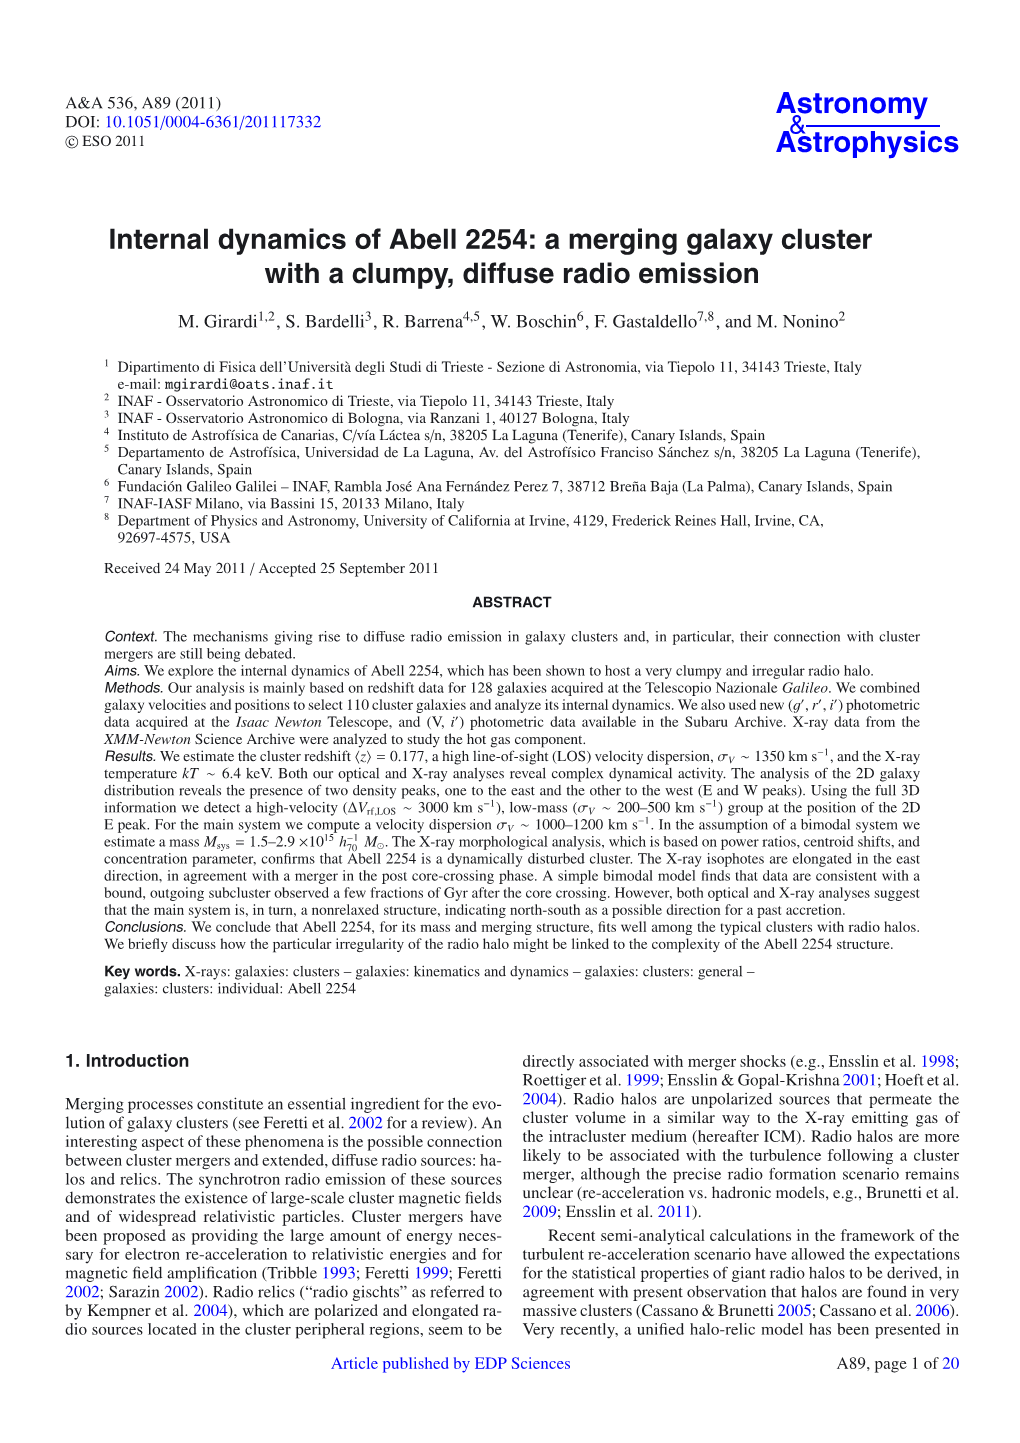 Internal Dynamics of Abell 2254: a Merging Galaxy Cluster with a Clumpy, Diffuse Radio Emission